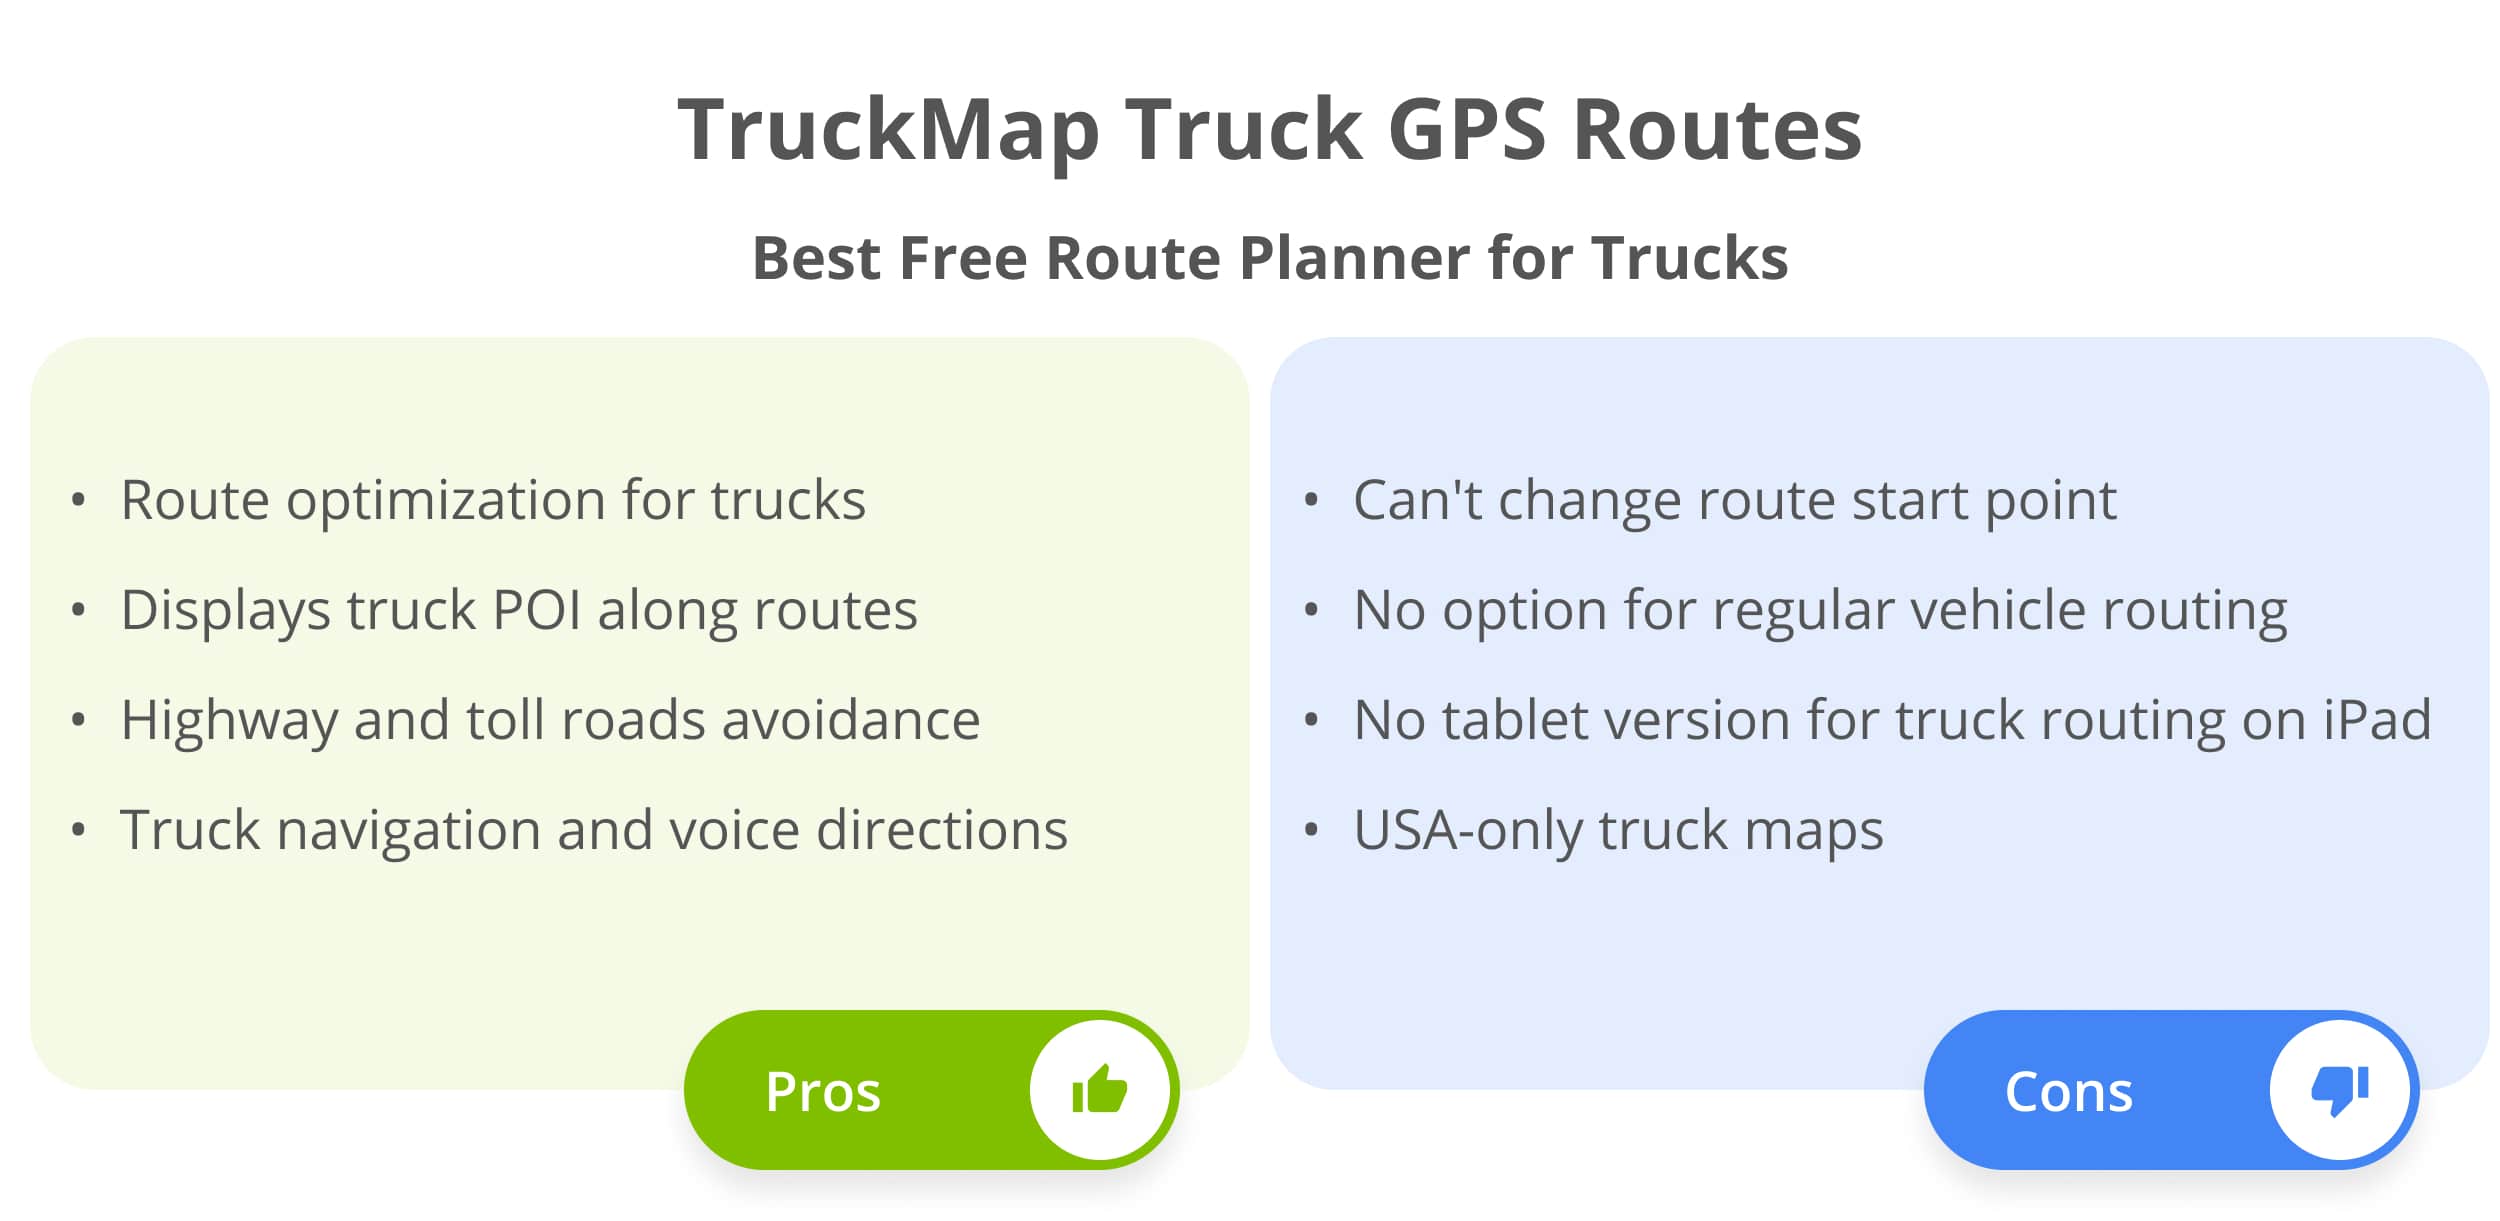 The pros and cons of using TruckMap truck GPS routes to plot routes for commercial vehicles.